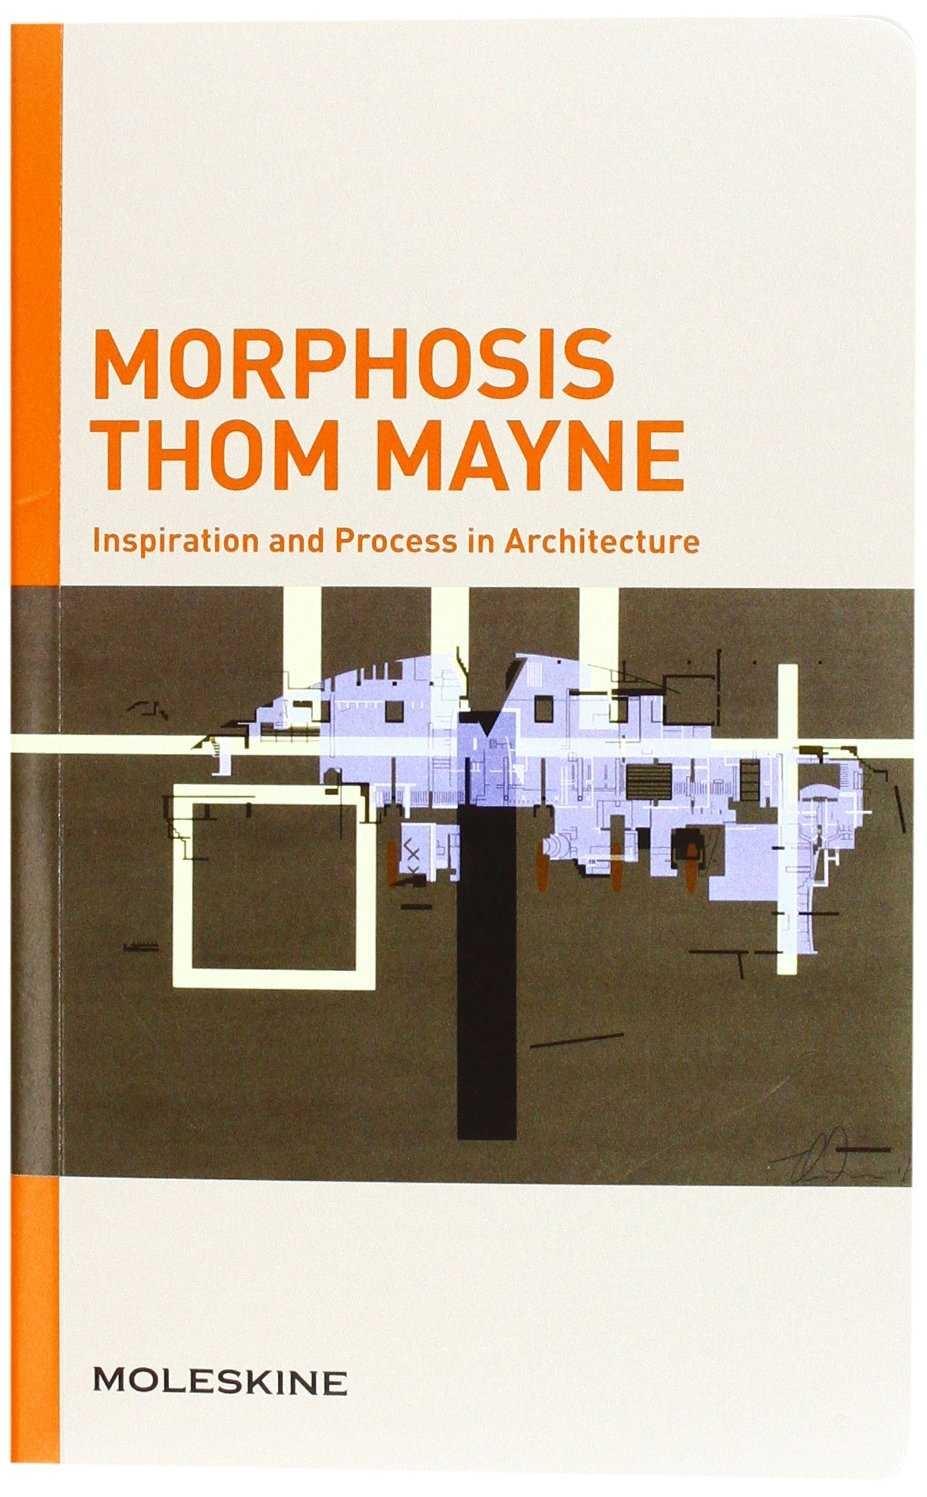 MORPHOSIS THOM MAYNE. INSPIRATION AND PROCESS IN ARCHITECTURE